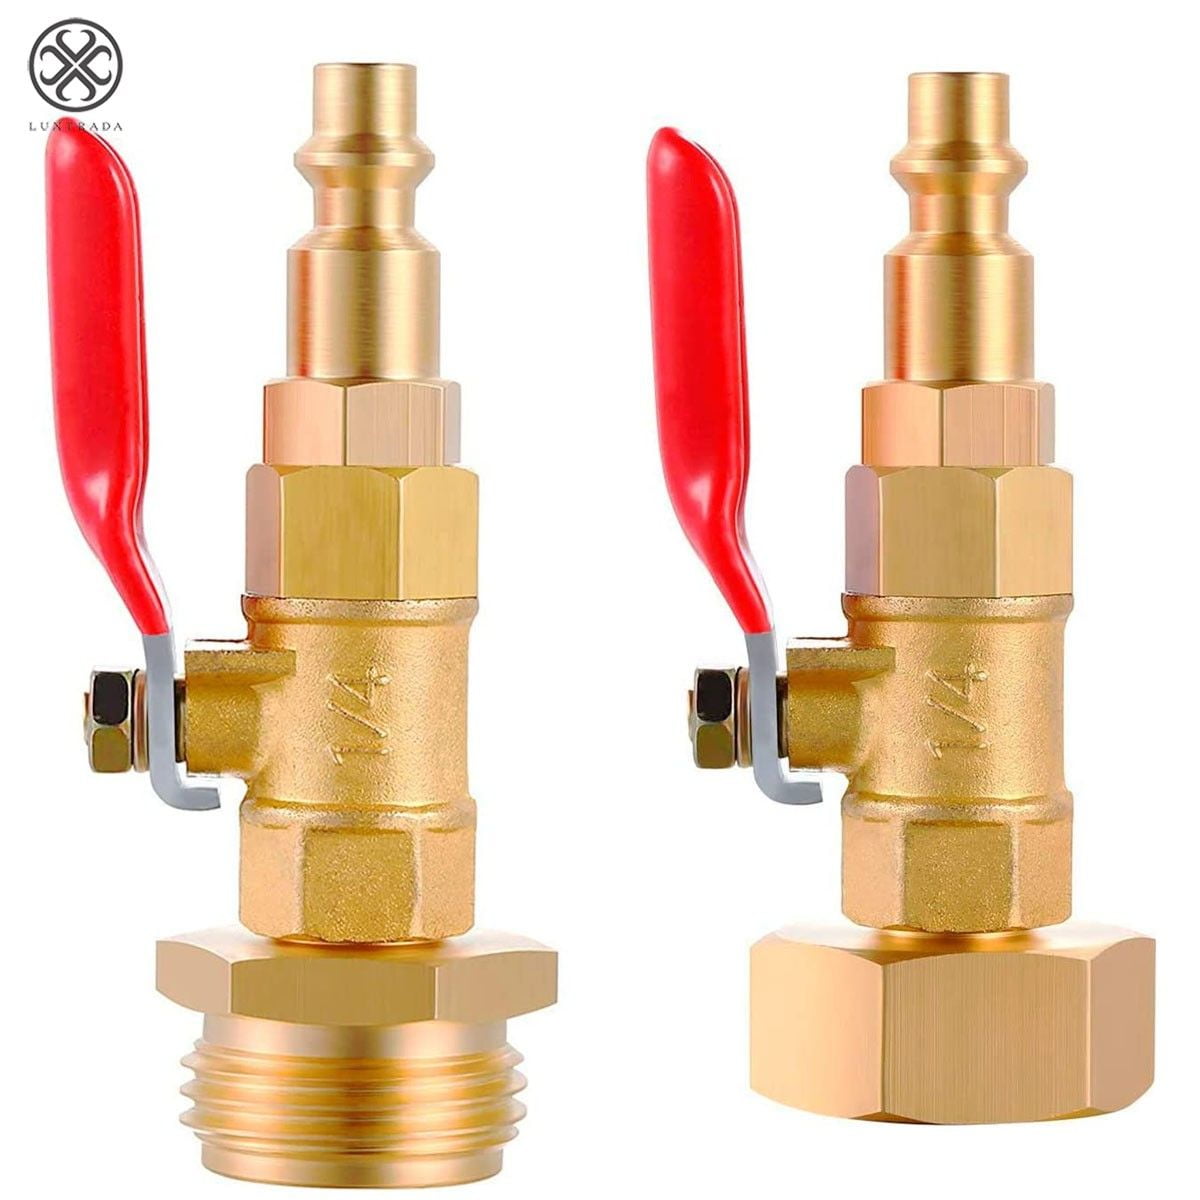 Air Compressor Quick Connect Plug Water Blow Out Adapter Fitting with Valve for Winterize Sprinkler System Cpwuflyd RV winterizing kit& Blowout Plug